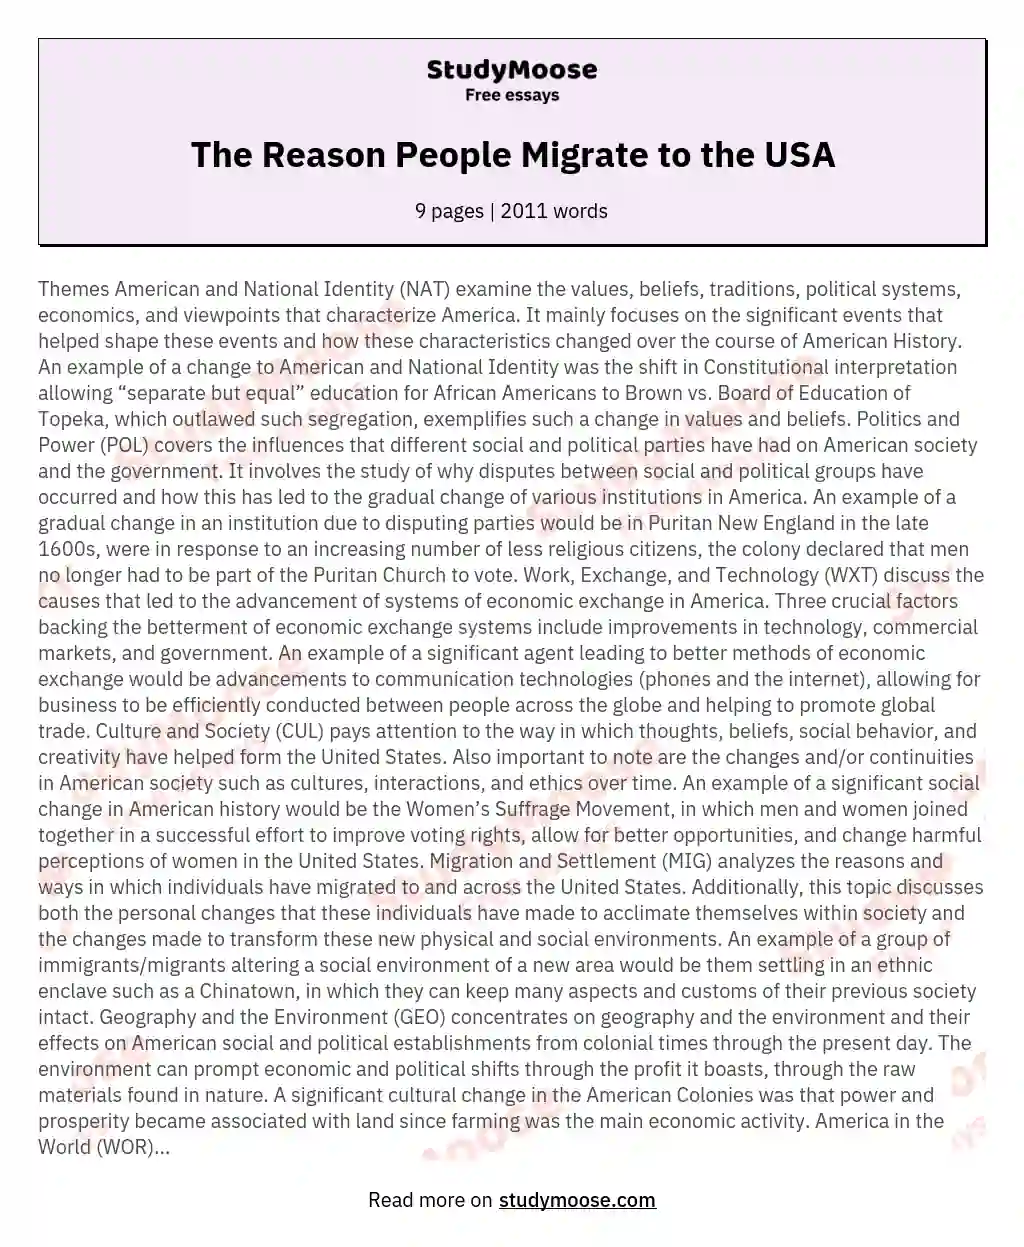 The Reason People Migrate to the USA essay